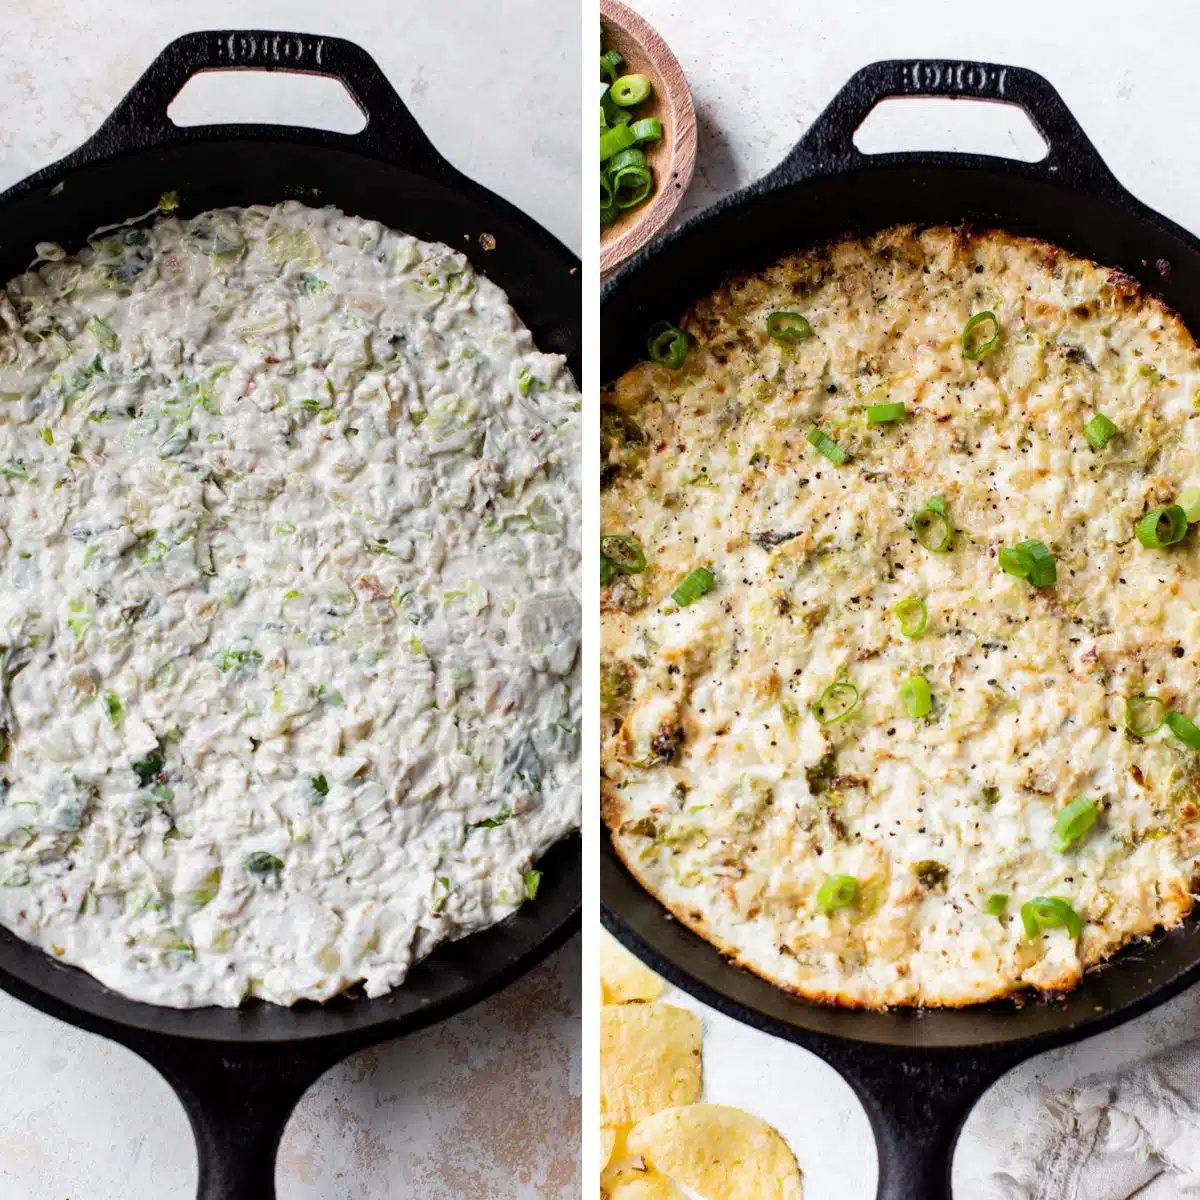 2 images: the right image shows the brussels sprouts and yogurt mixture transferred to a cast iron skillet and the right image shows the brussels sprouts dip baked in a cast iron skillet